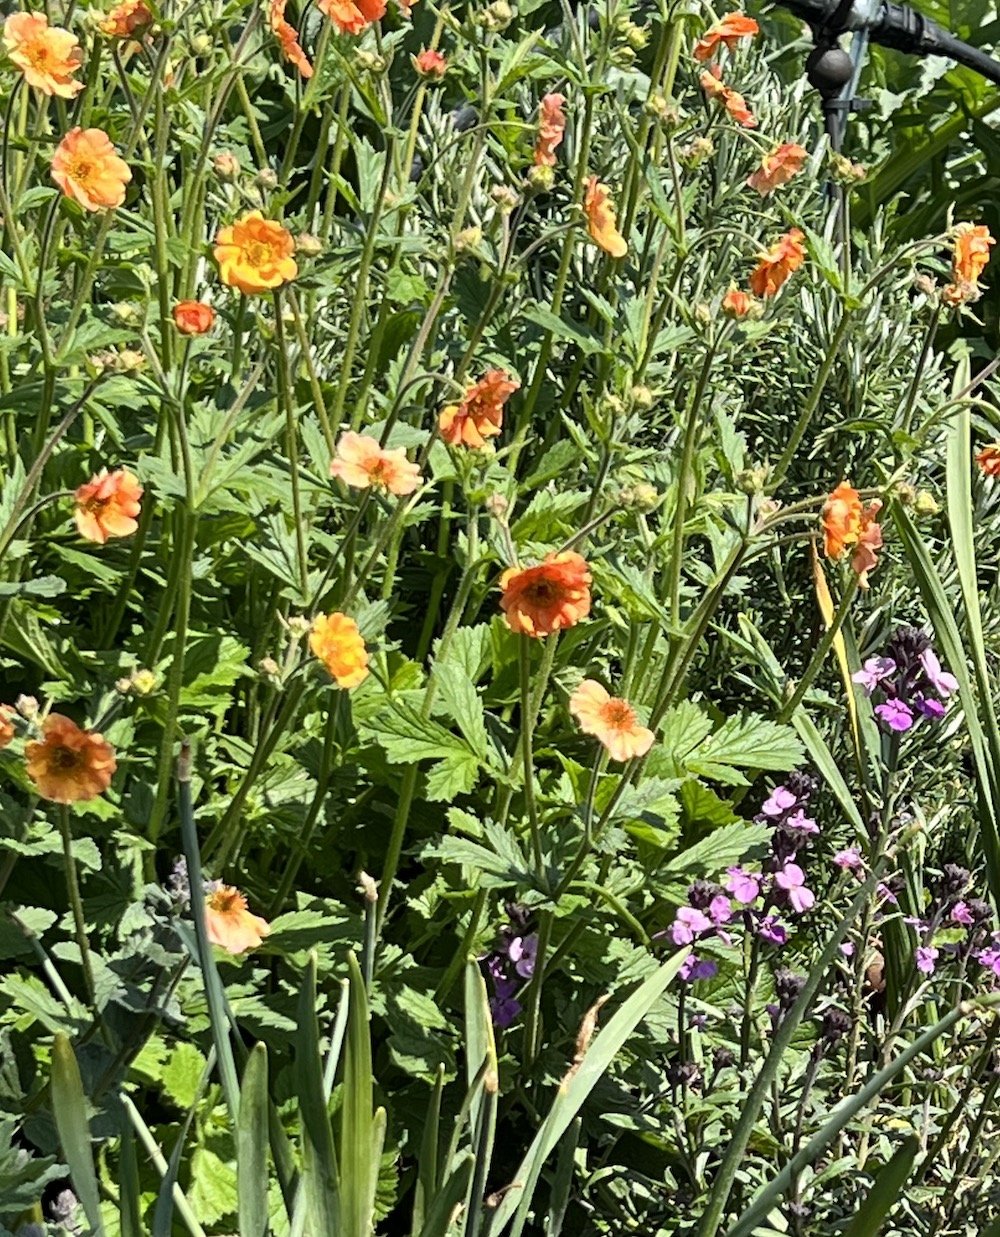 Geum ‘Totally Tangerine’ completely hides the small semi-circular supporting it